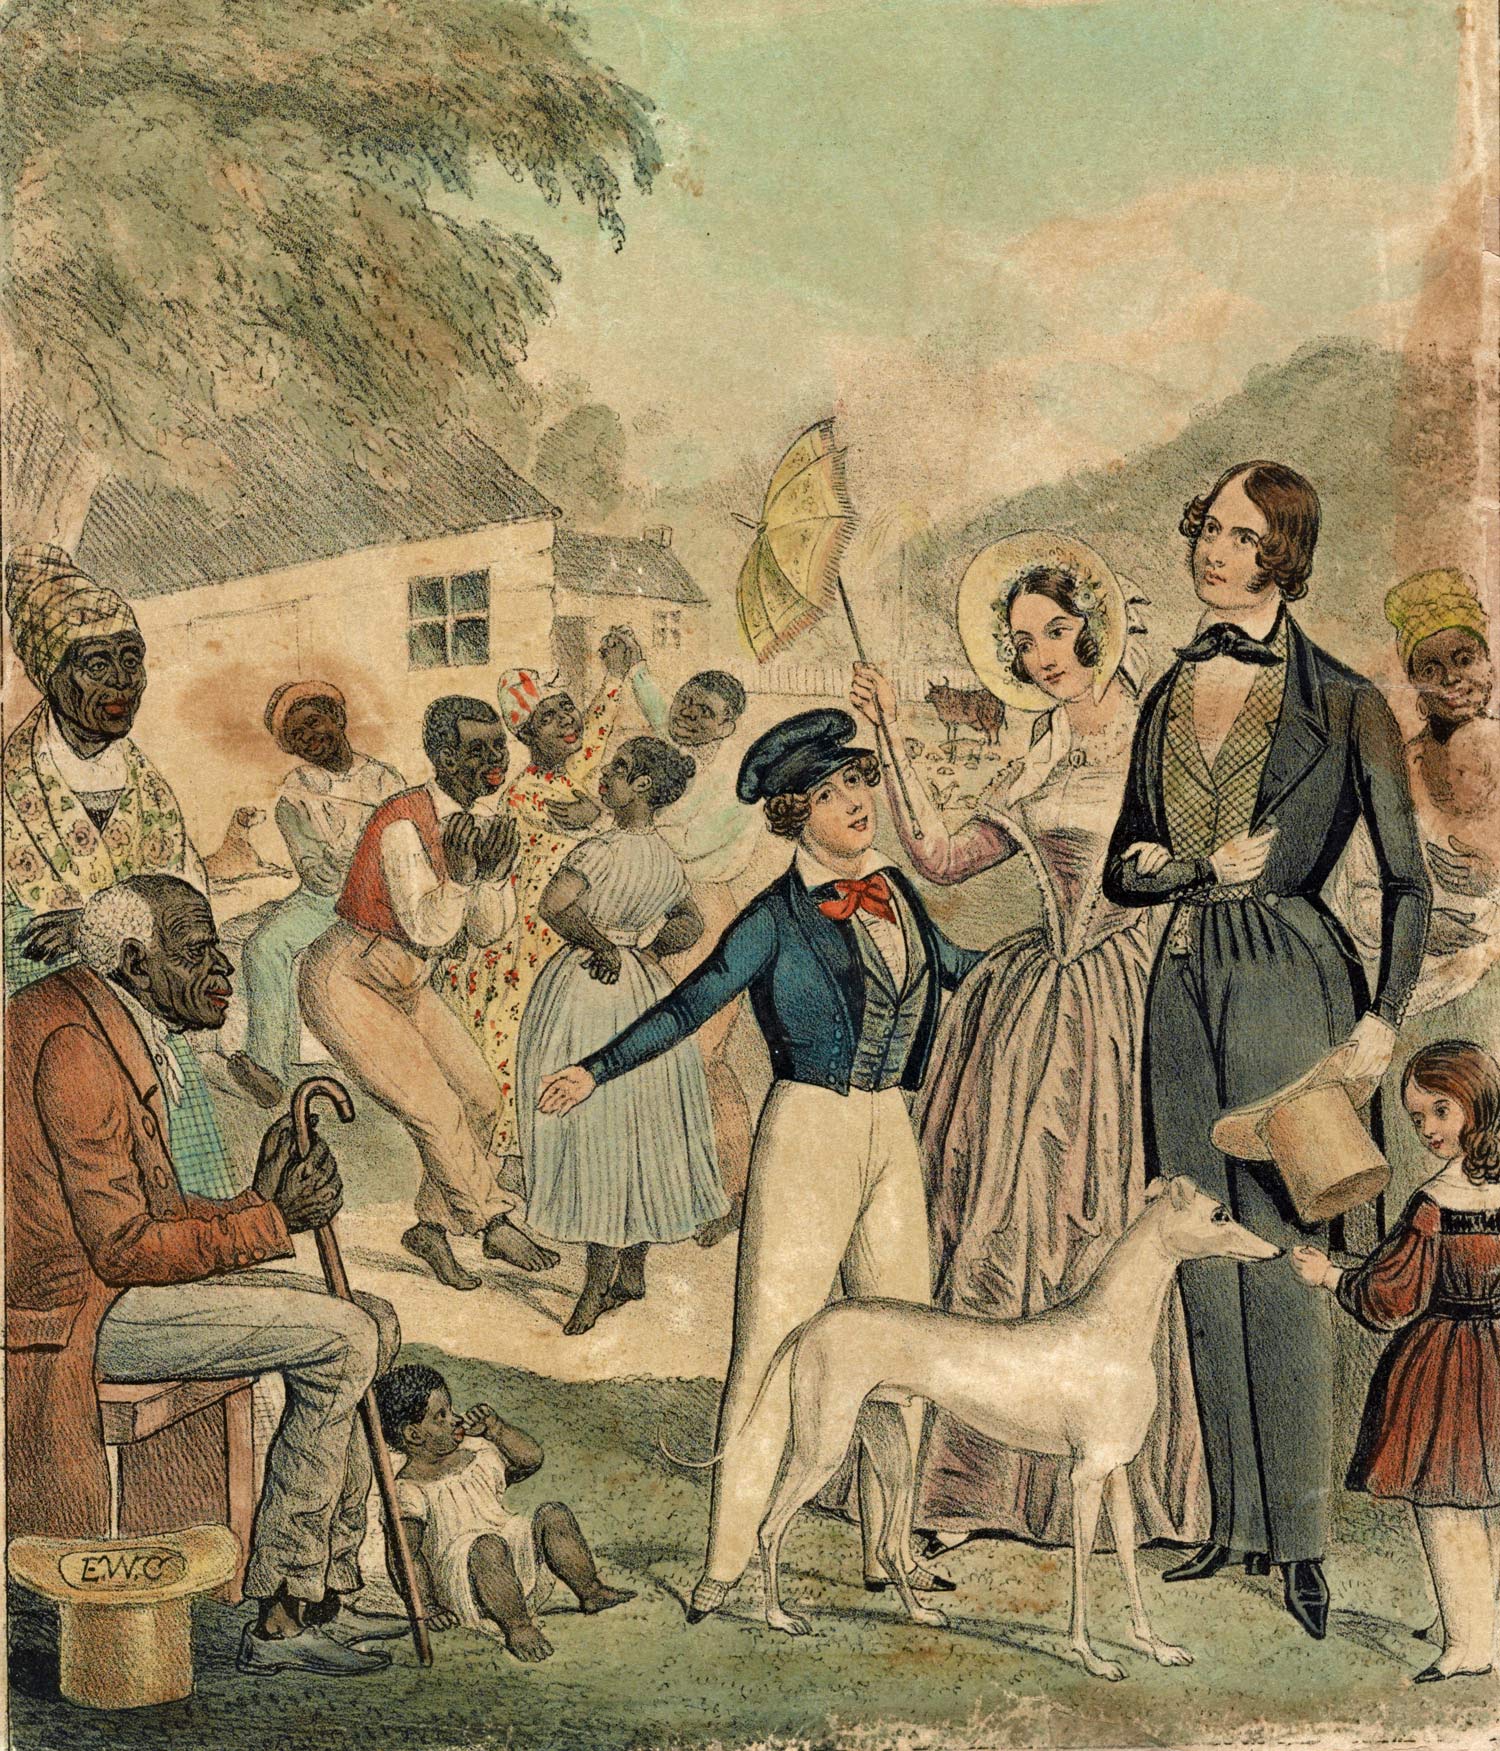 "America," by Edward William Clay (1841), shows an idealized portrayal of American slavery and the conditions of blacks under this system in 1841 